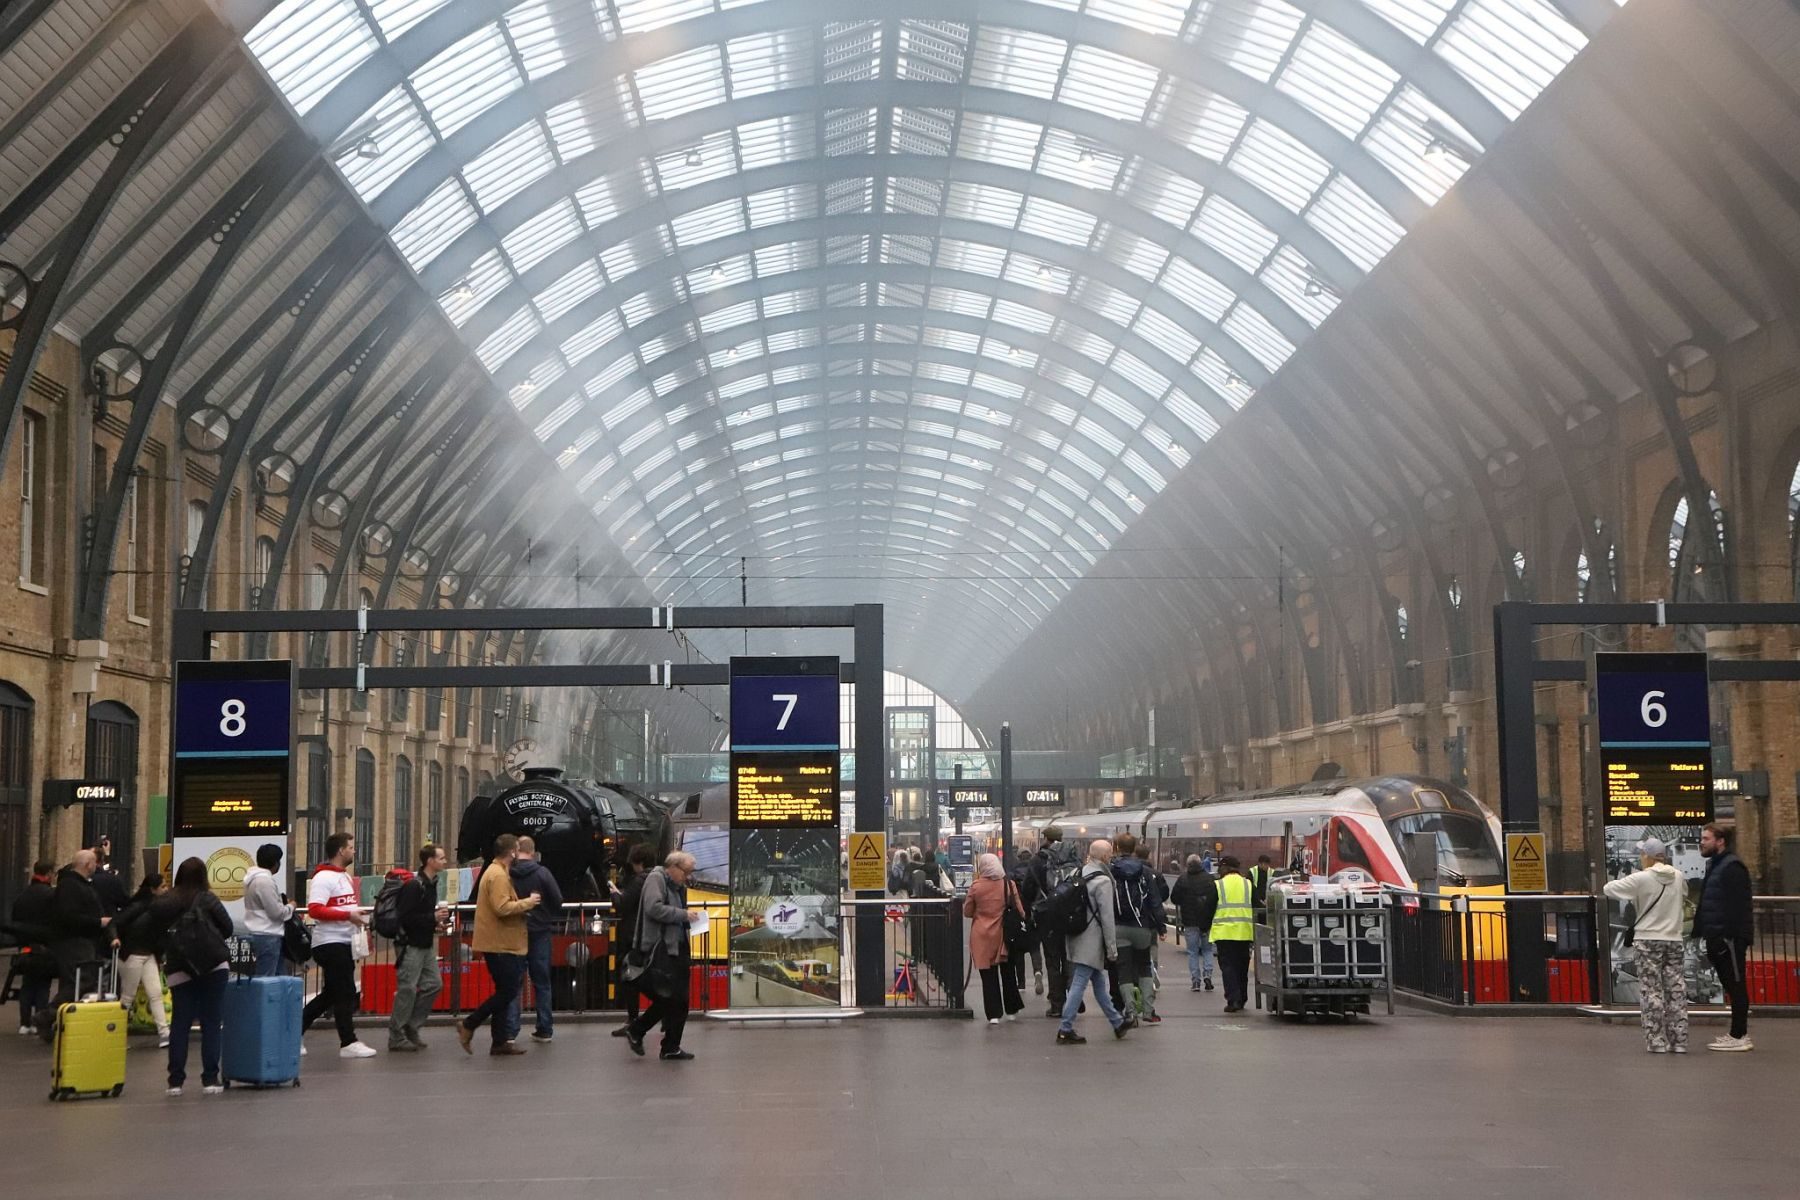 King's Cross train shed arched roof. Flying Scotsman steam locomotive at King's Cross railway station platform 8 for the 170th anniversary of the station's opening and the start of Flying Scotsman's 100th birthday celebrations